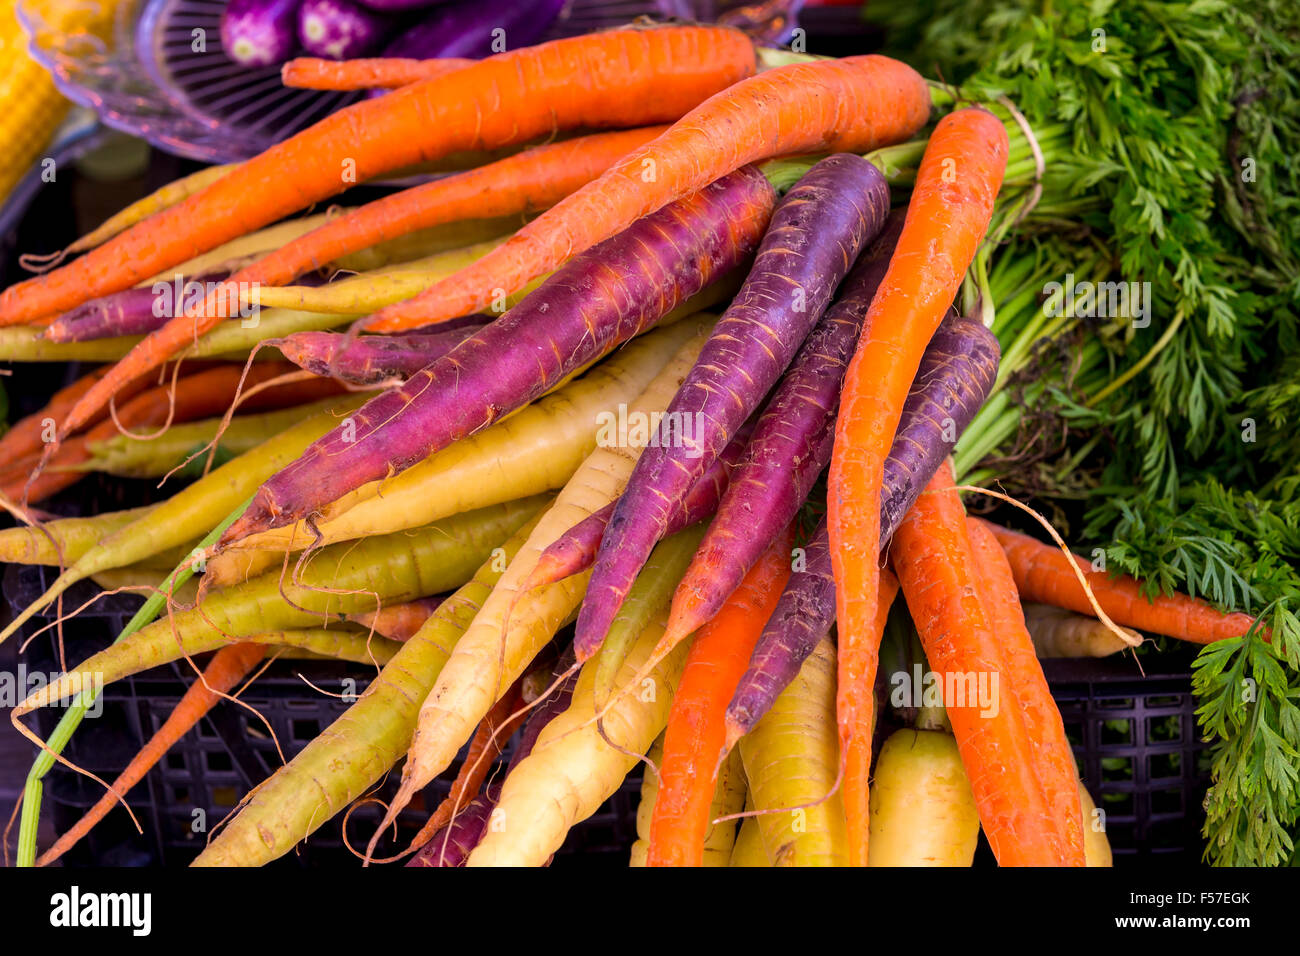 Sale of root vegetables at weekly market, Santanyi, Mallorca, Balearic Islands, Spain Stock Photo